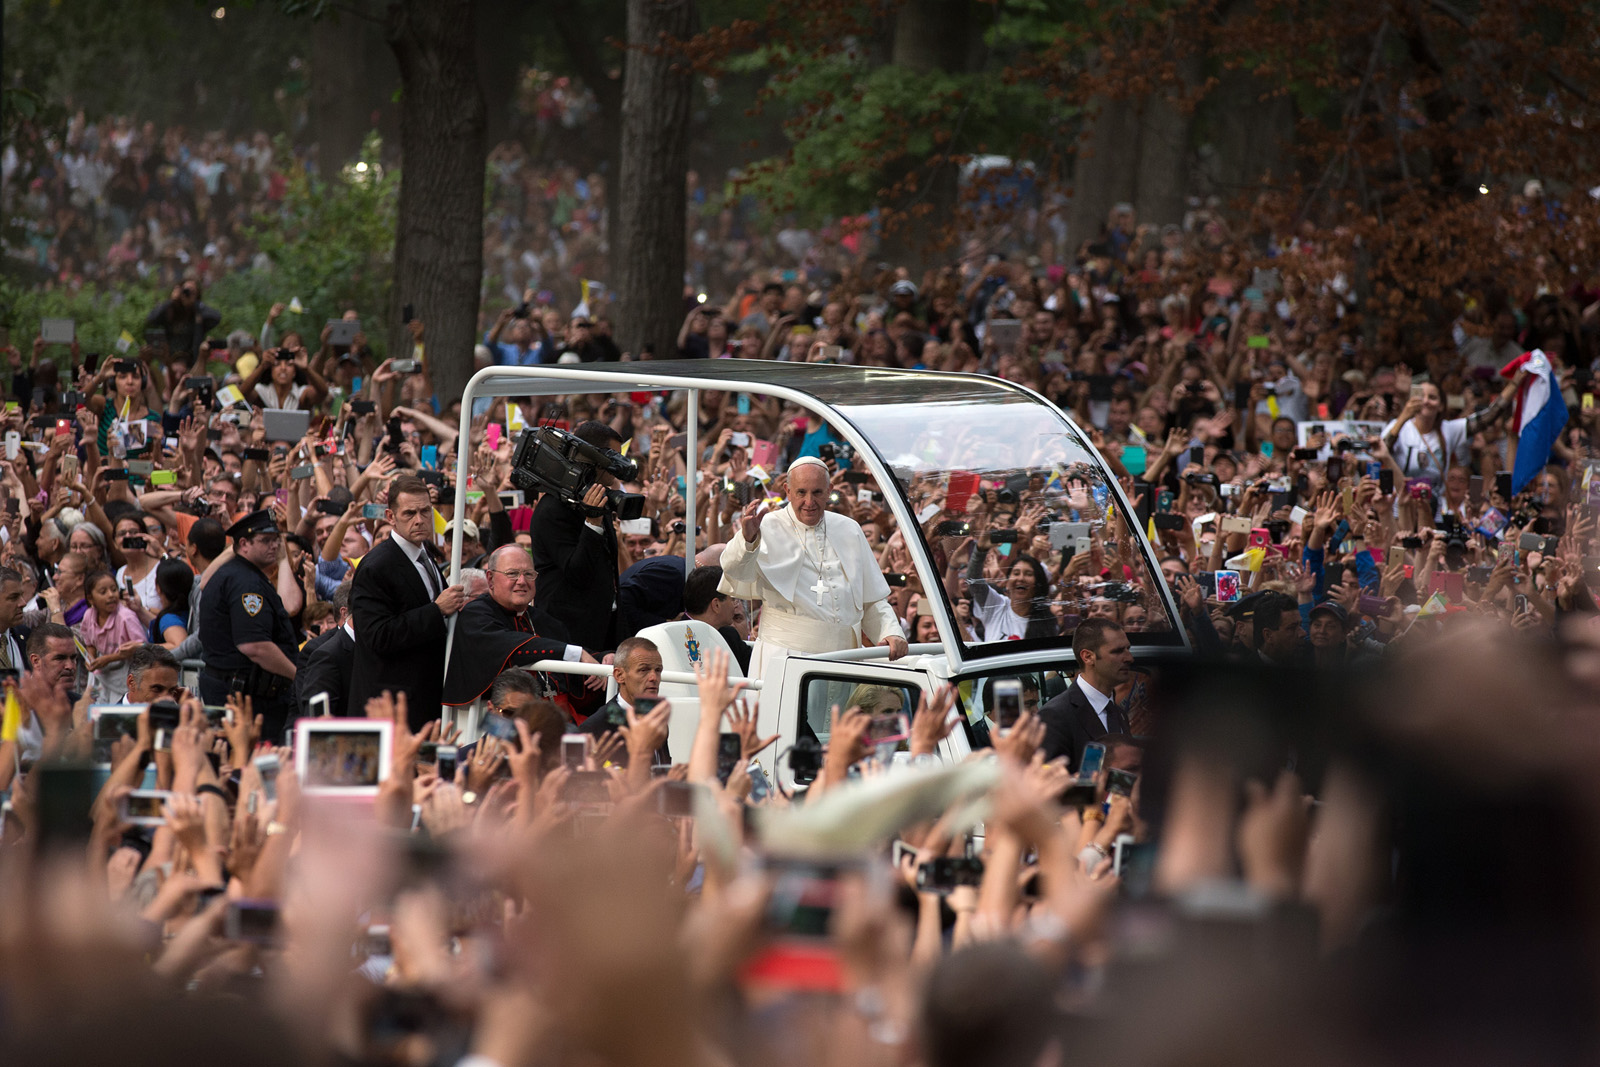 NEW YORK, NY - SEPTEMBER 25:  Pope Francis waves as he rides through Central Park in a Papal motorcade on September 25, 2015 in New York City. The Pope is in New York on a two-day visit. He spoke at the United Nations General-Assembly earlier and will lead a Mass in Madison Square Garden tonight.  (Photo by Carl Court/Getty Images)